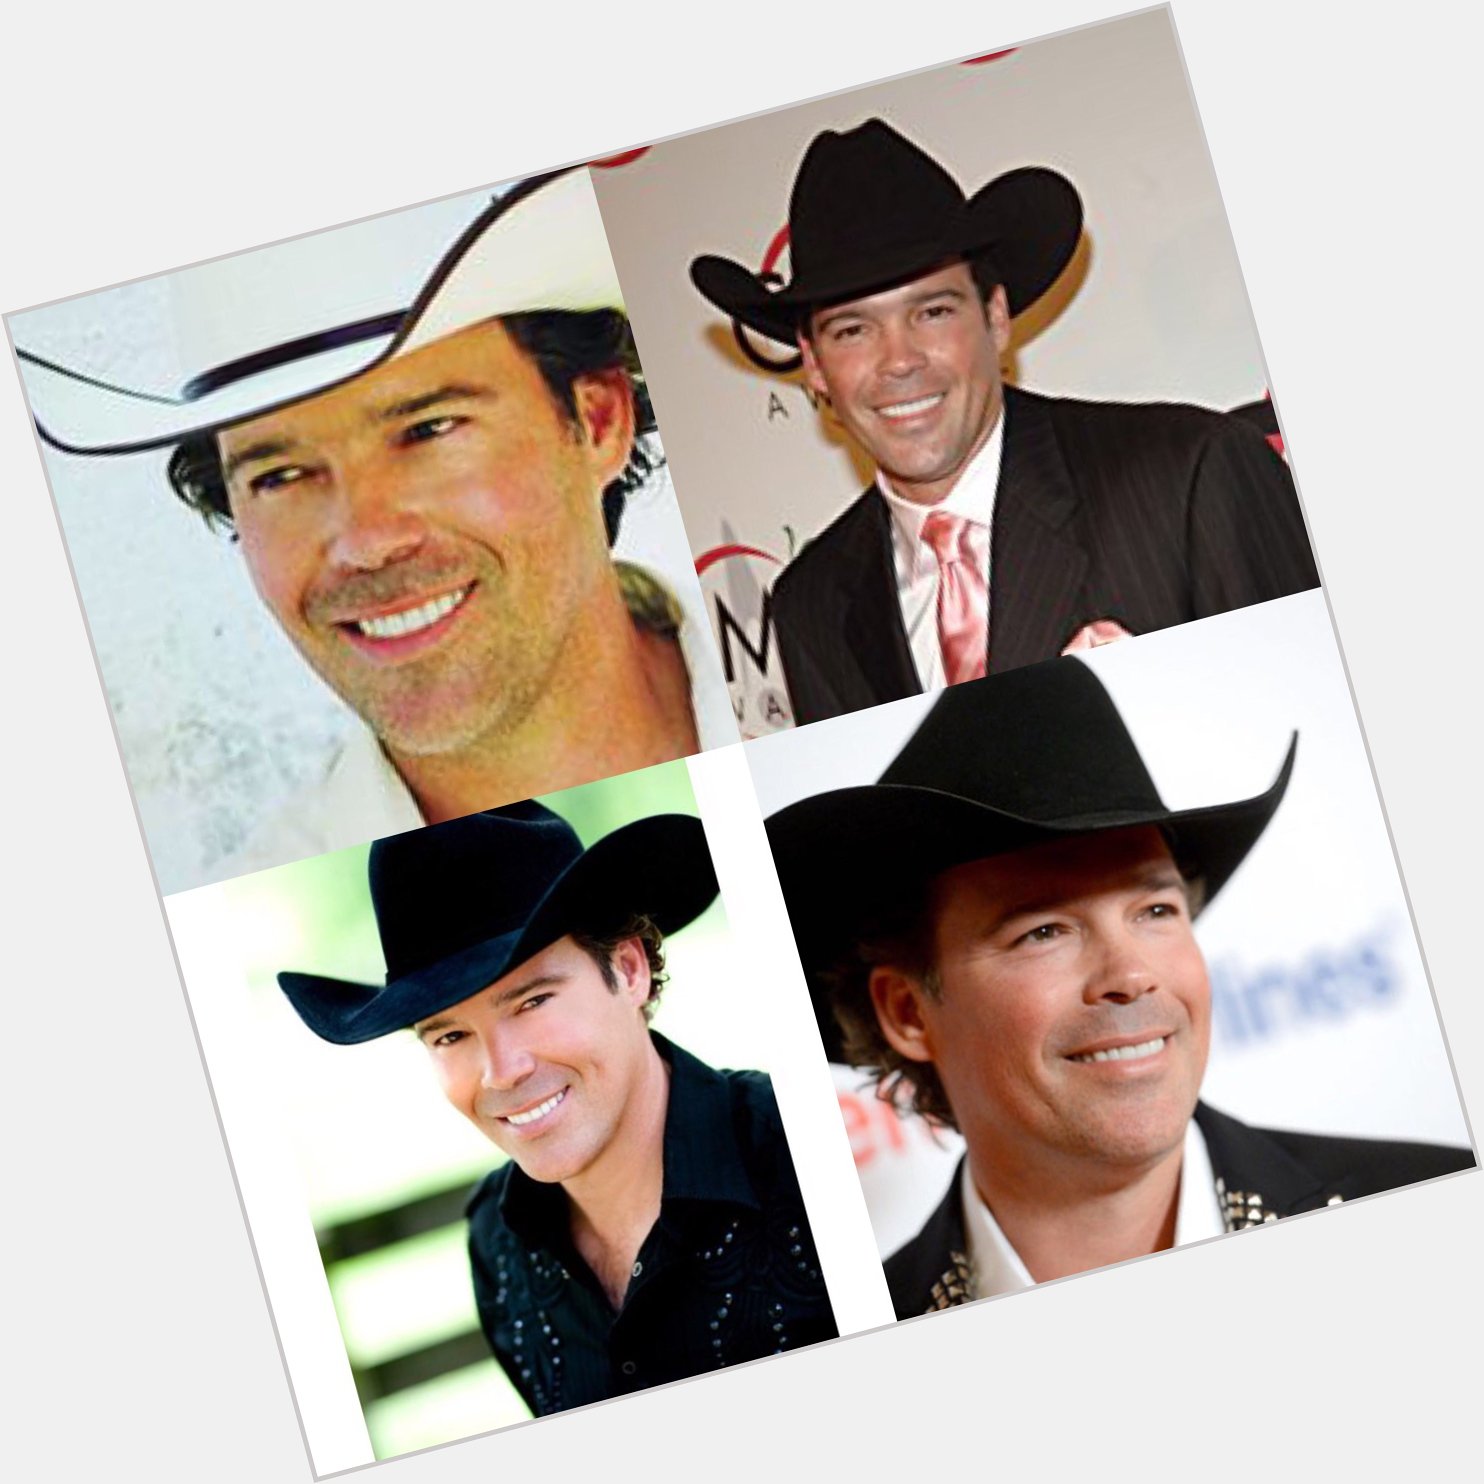 Happy 48 birthday to Clay walker . Hope that he has a wonderful birthday.     